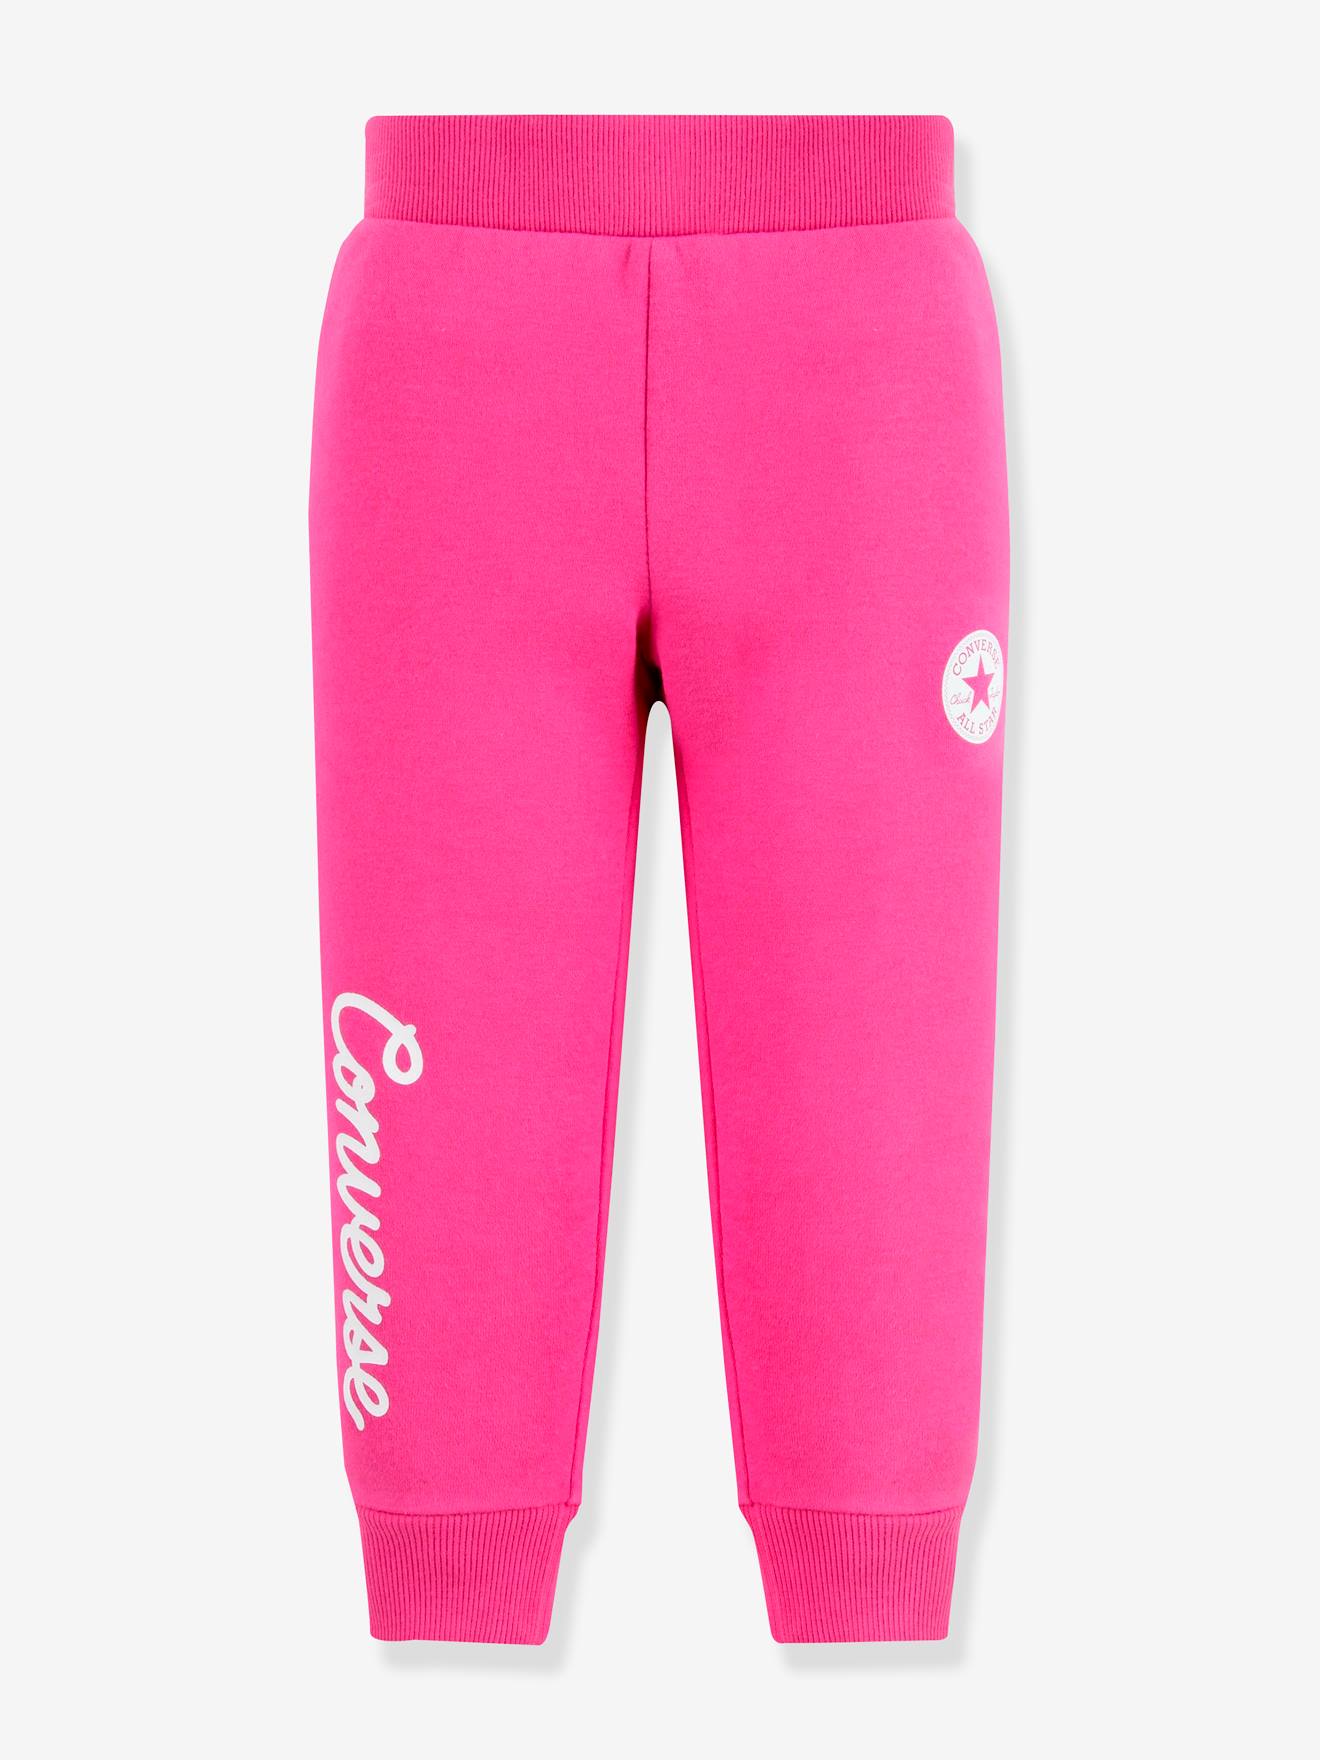 Joggers for | Children, - by CONVERSE Girls Patch Vertbaudet rose, Chuck